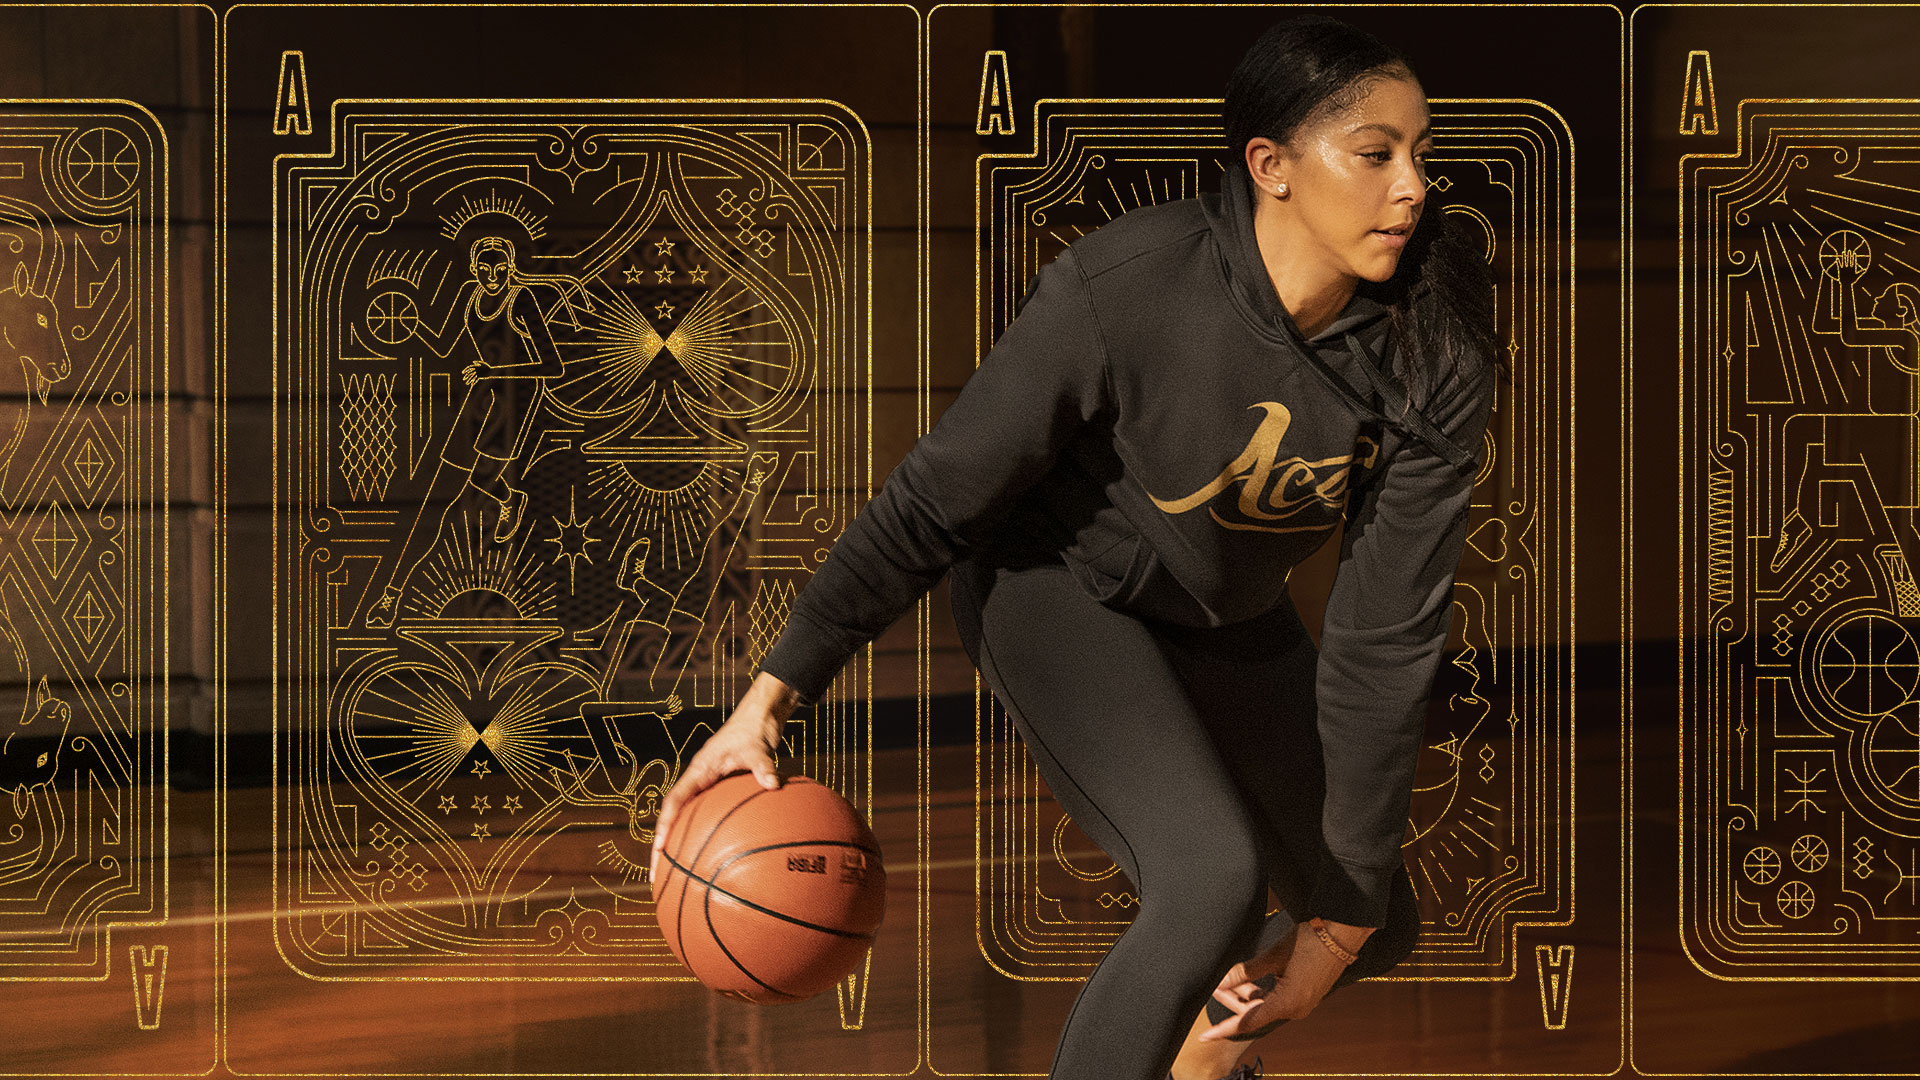 Candace Ace Parker Visual System for Signature Product line by Fabiano Tatu